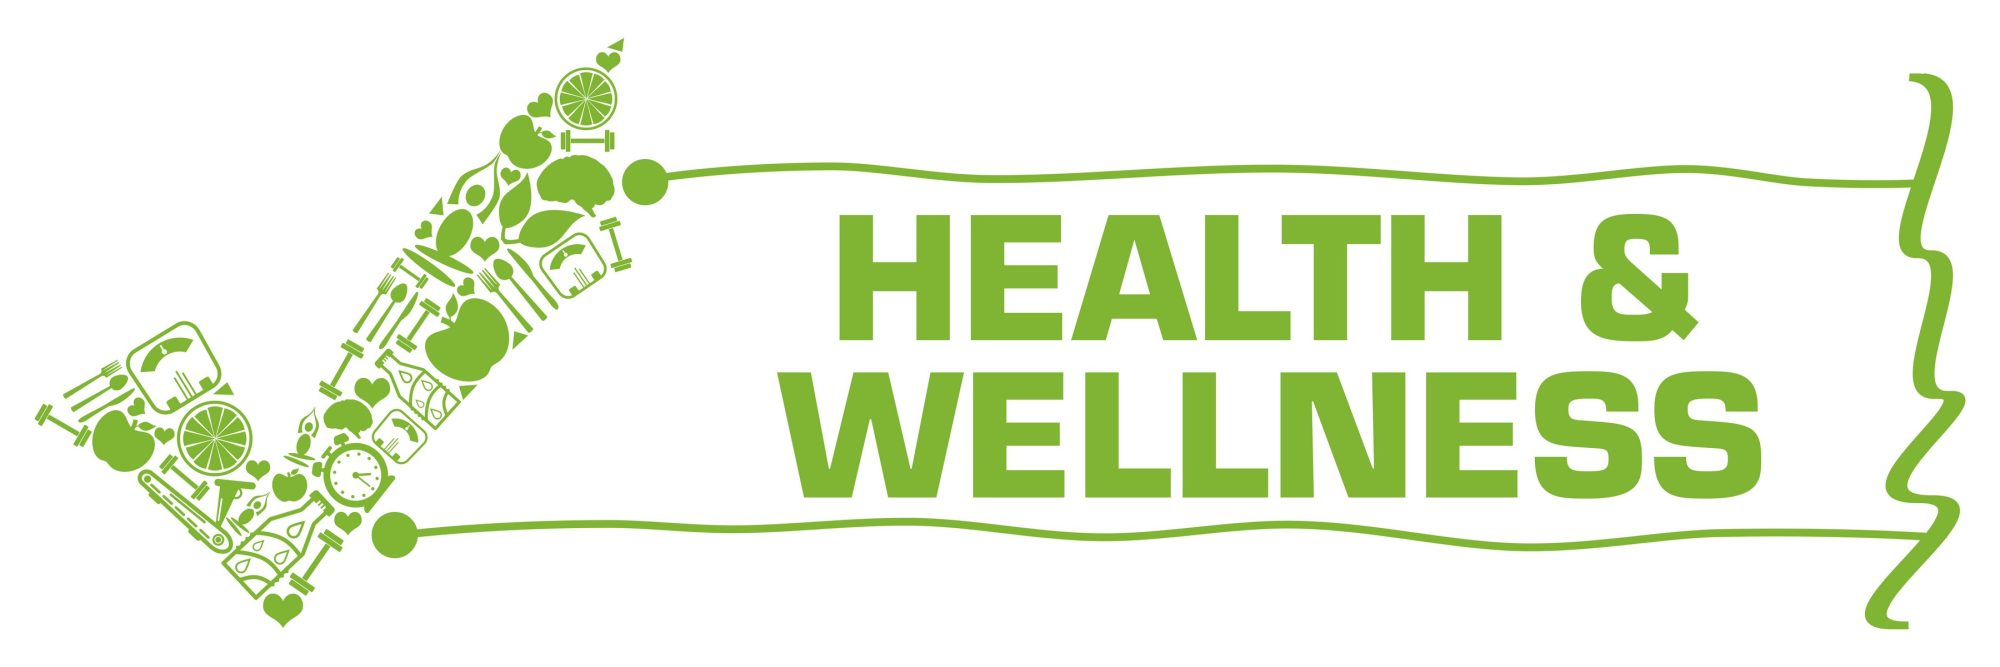 Healthy Vending Anderson | Workplace Wellness | Healthy Employees